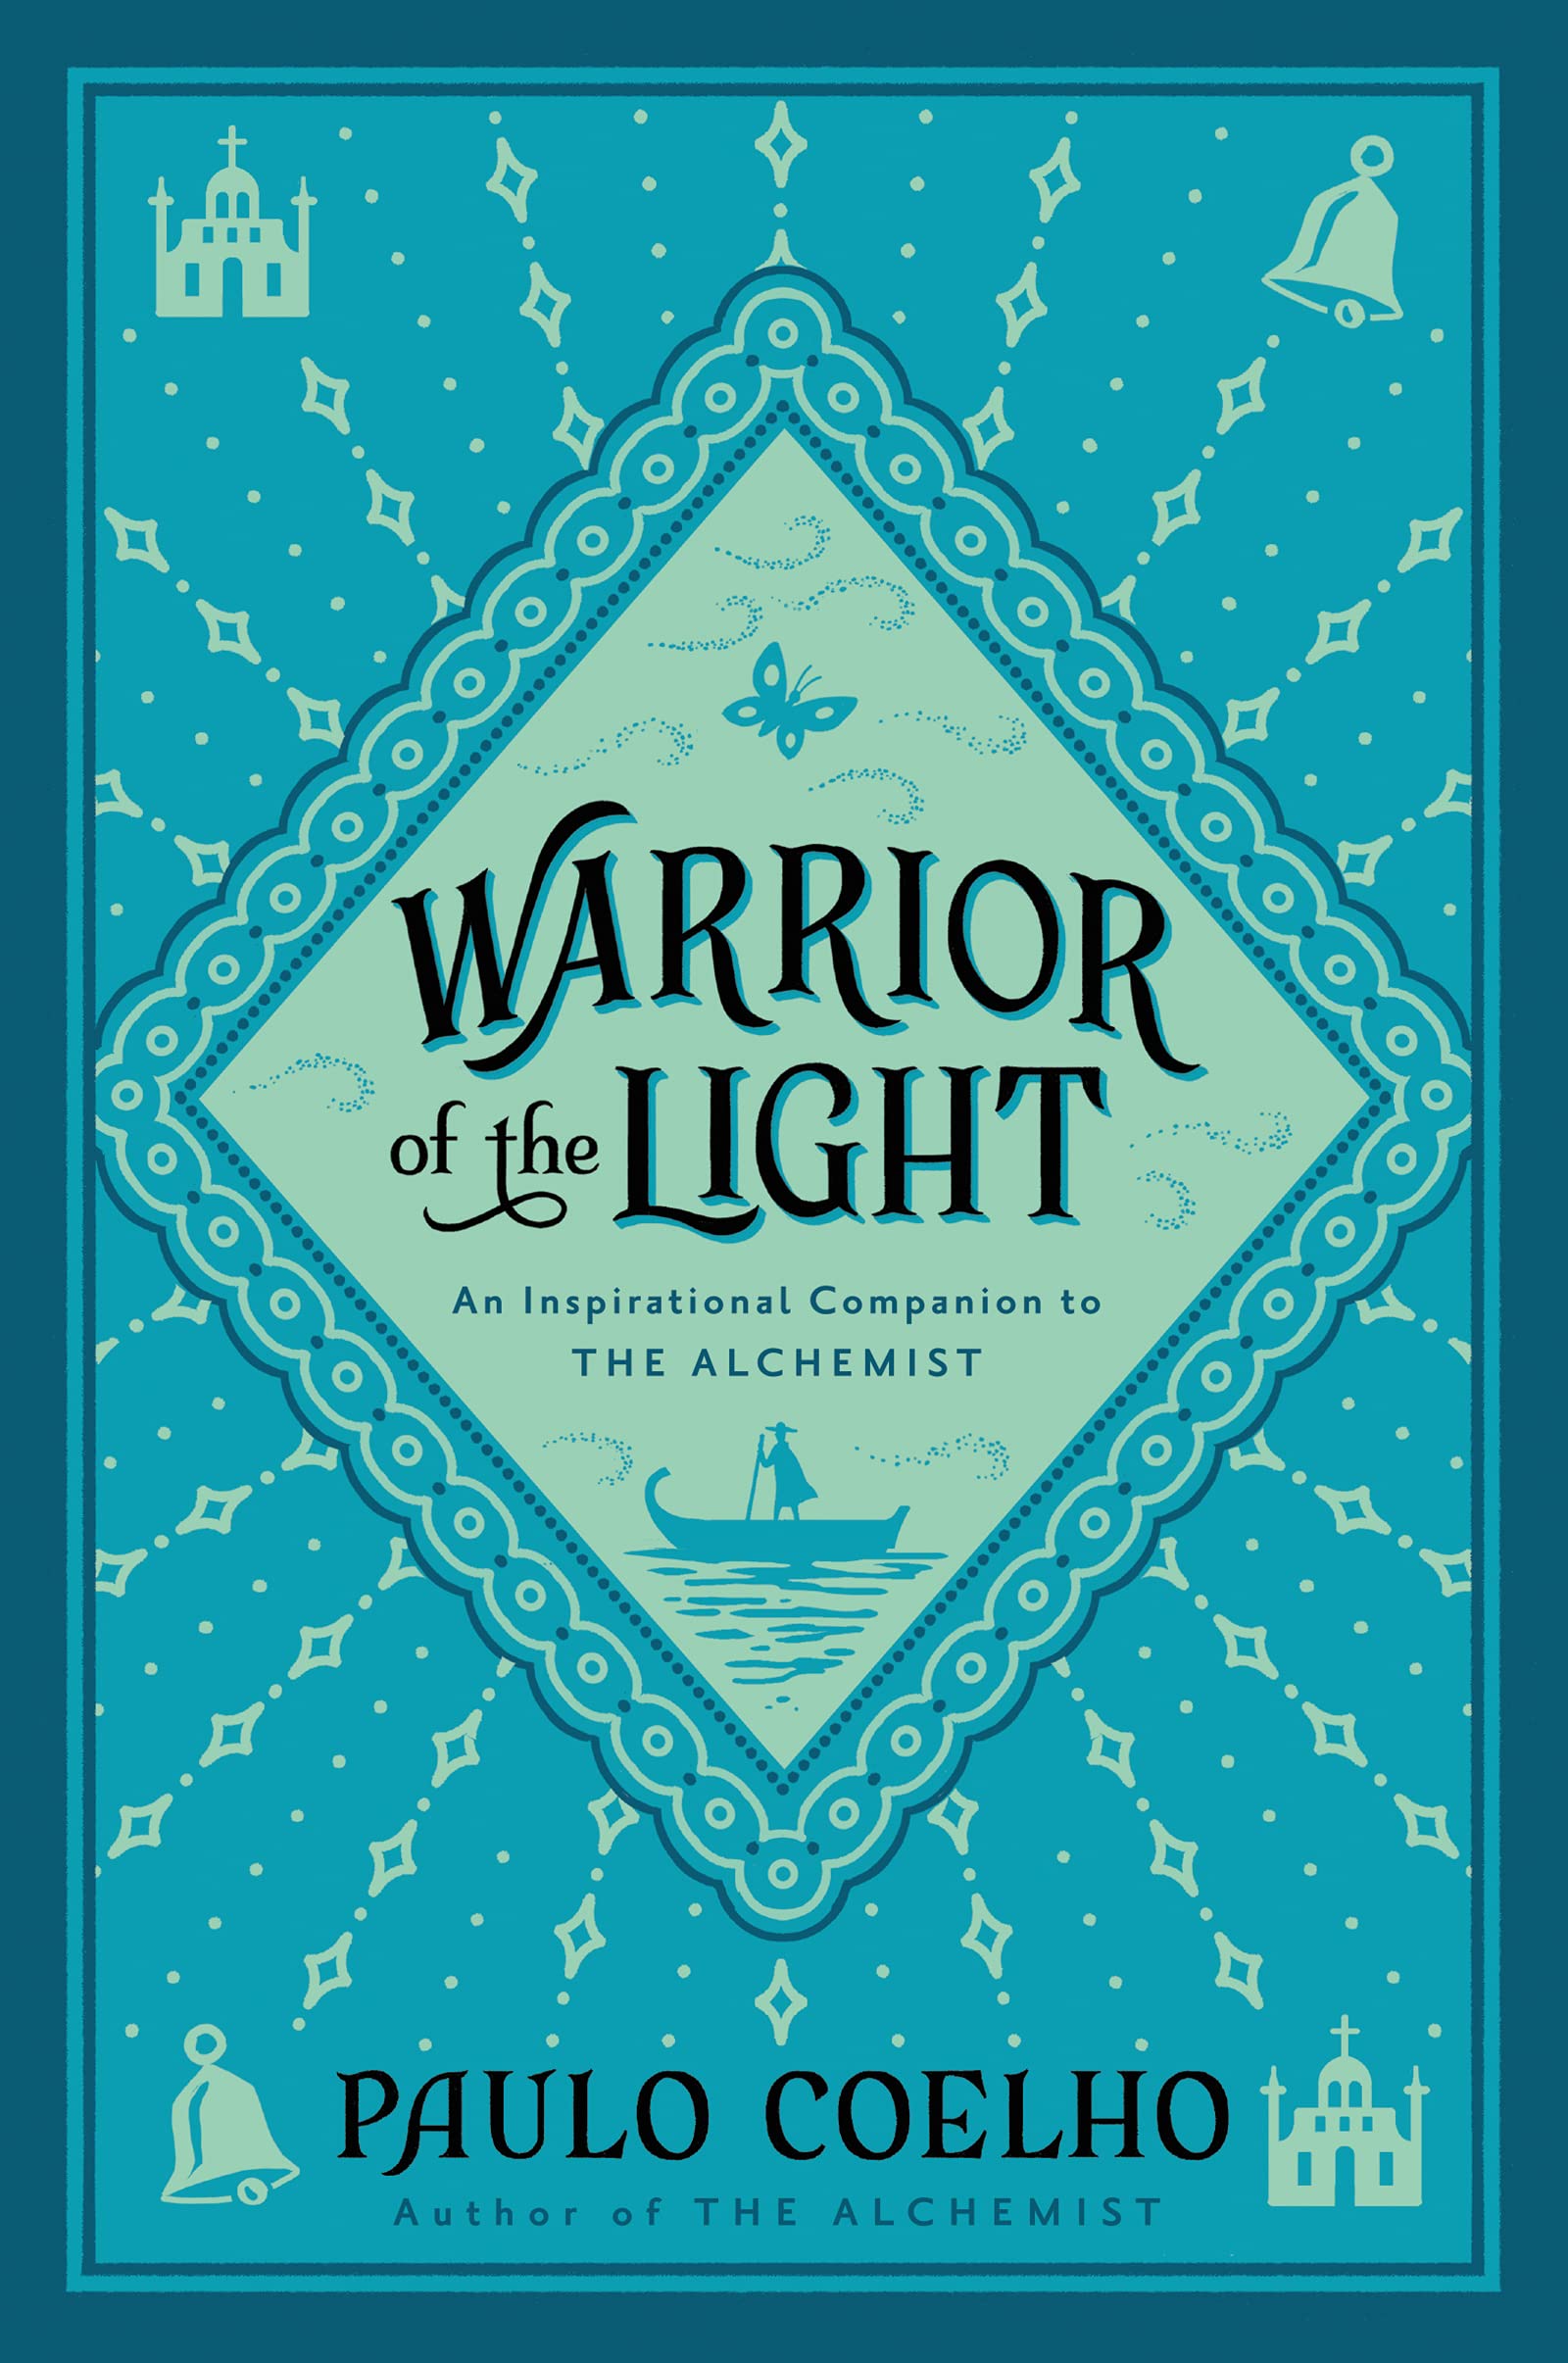 The book cover for Warrior of the Light.